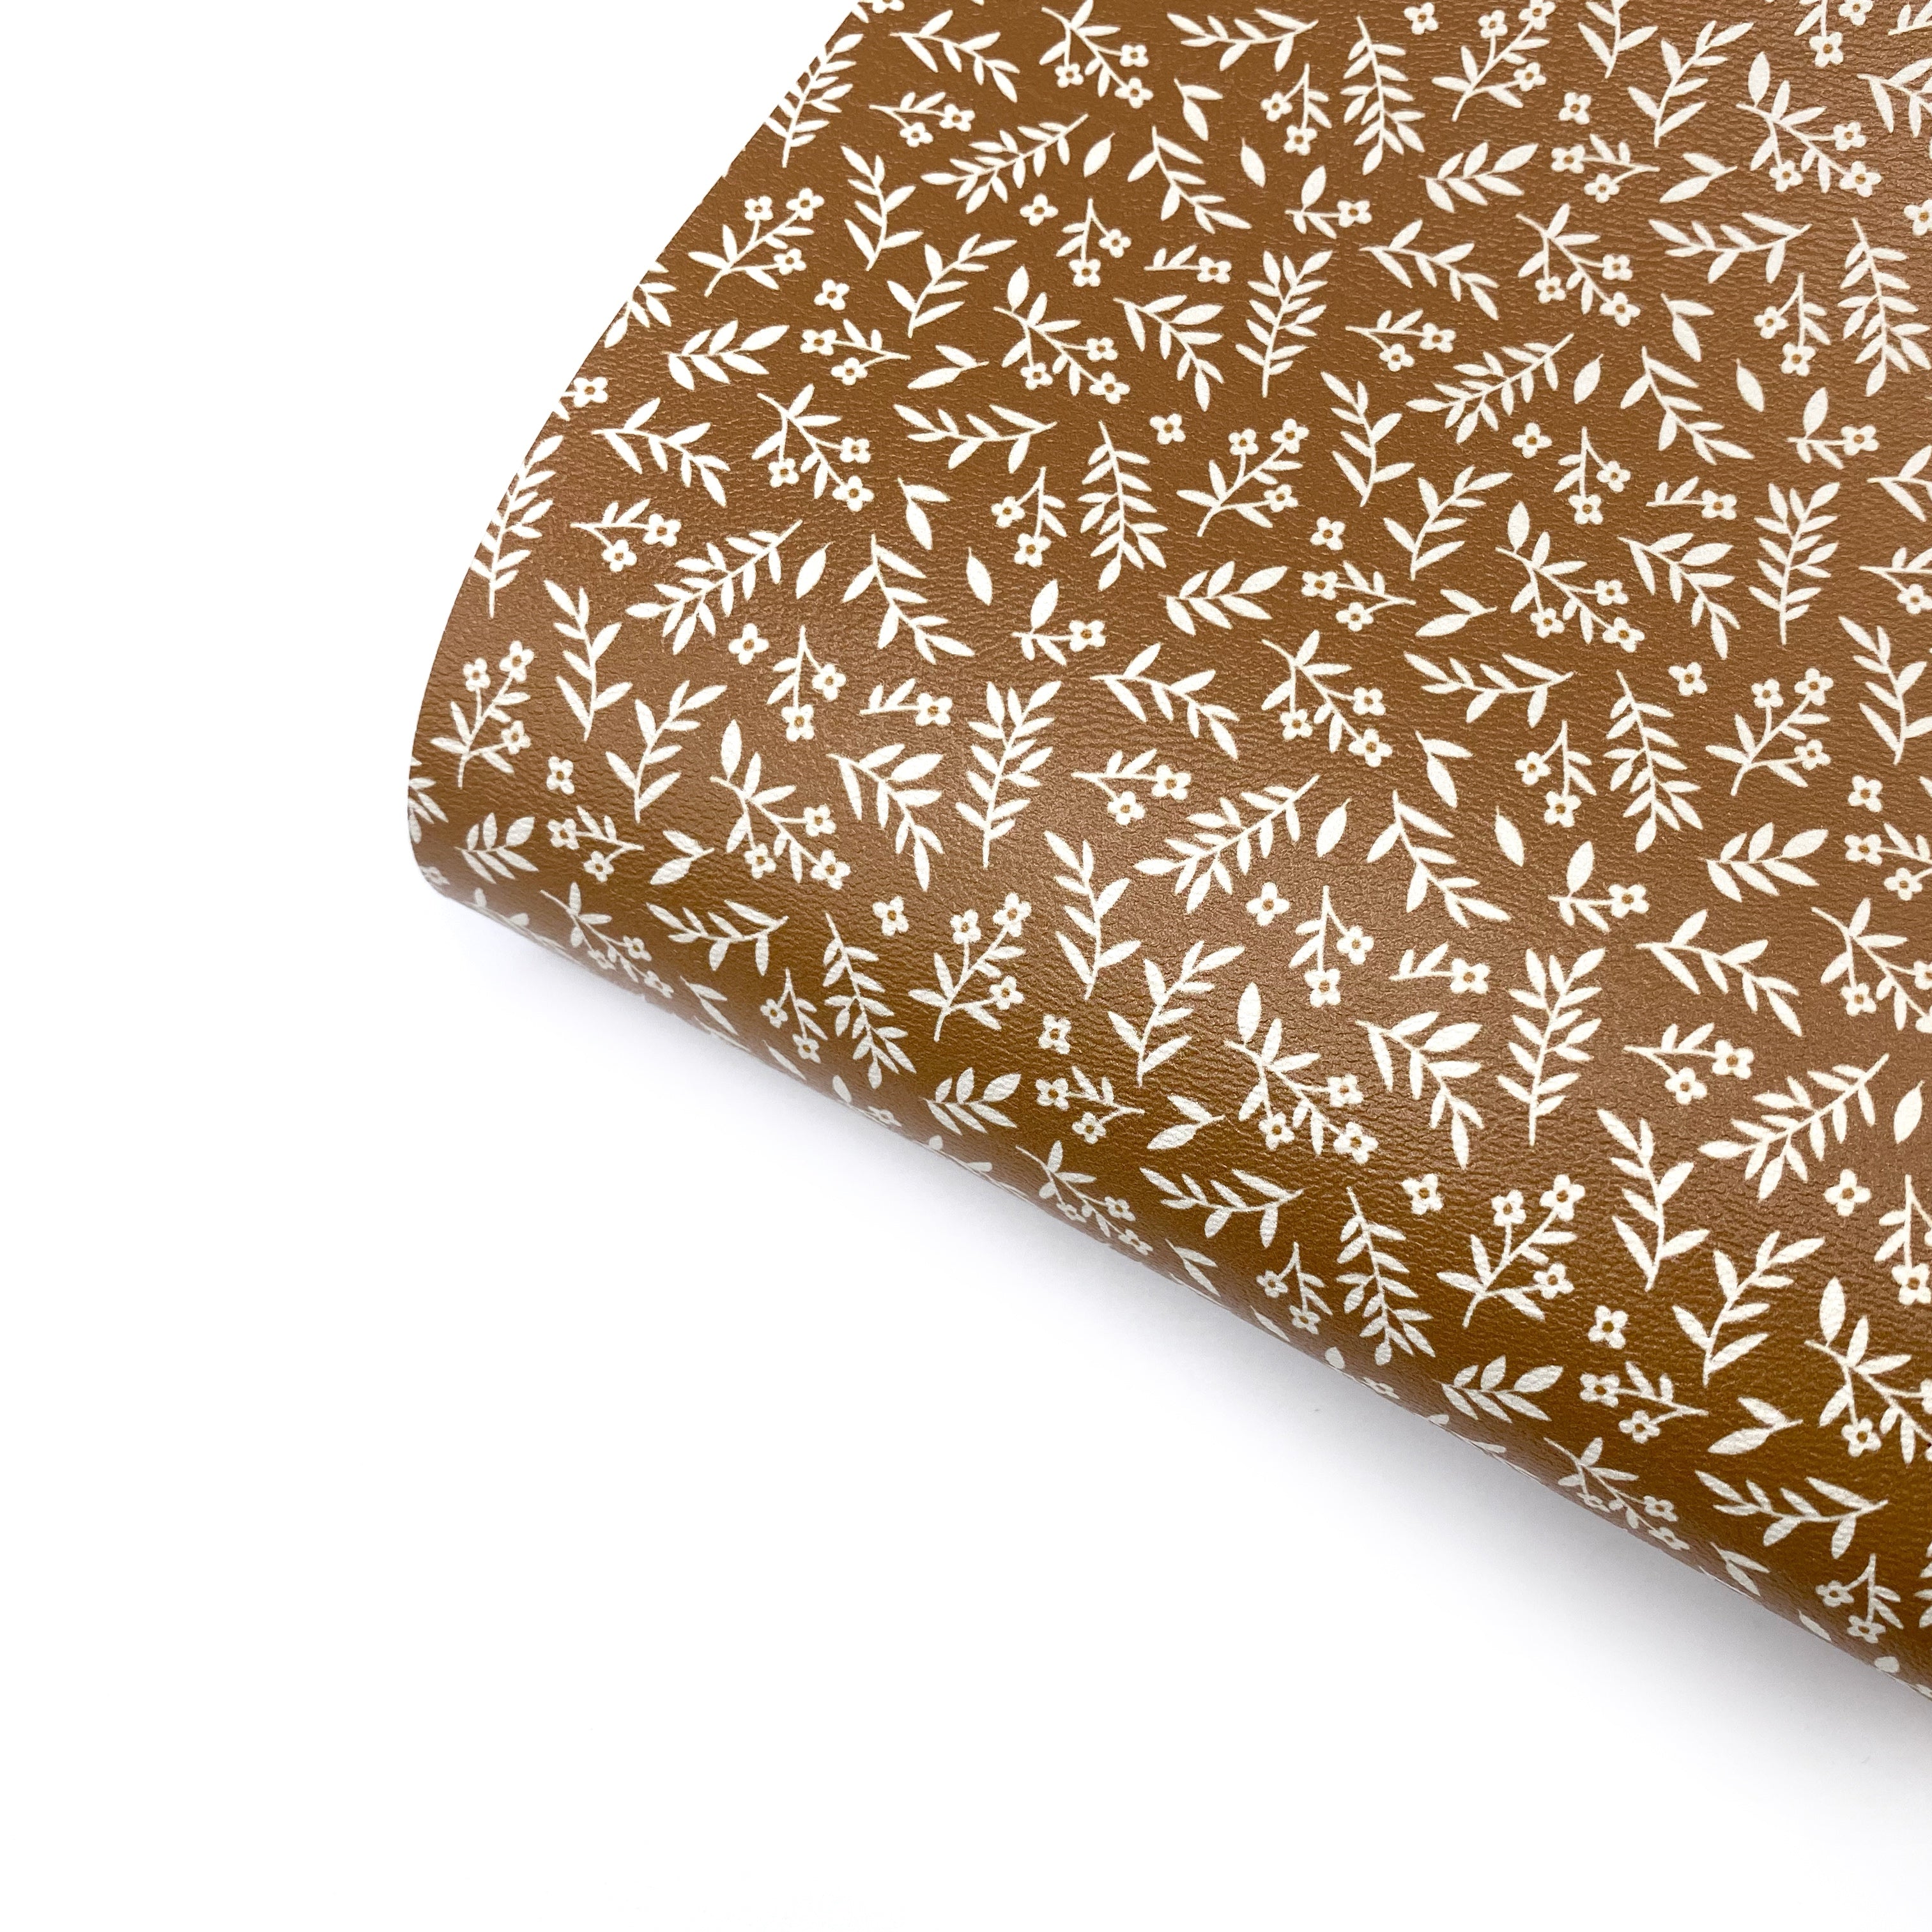 Brown Falling Fall Florals Premium Faux Leather Fabric Sheets